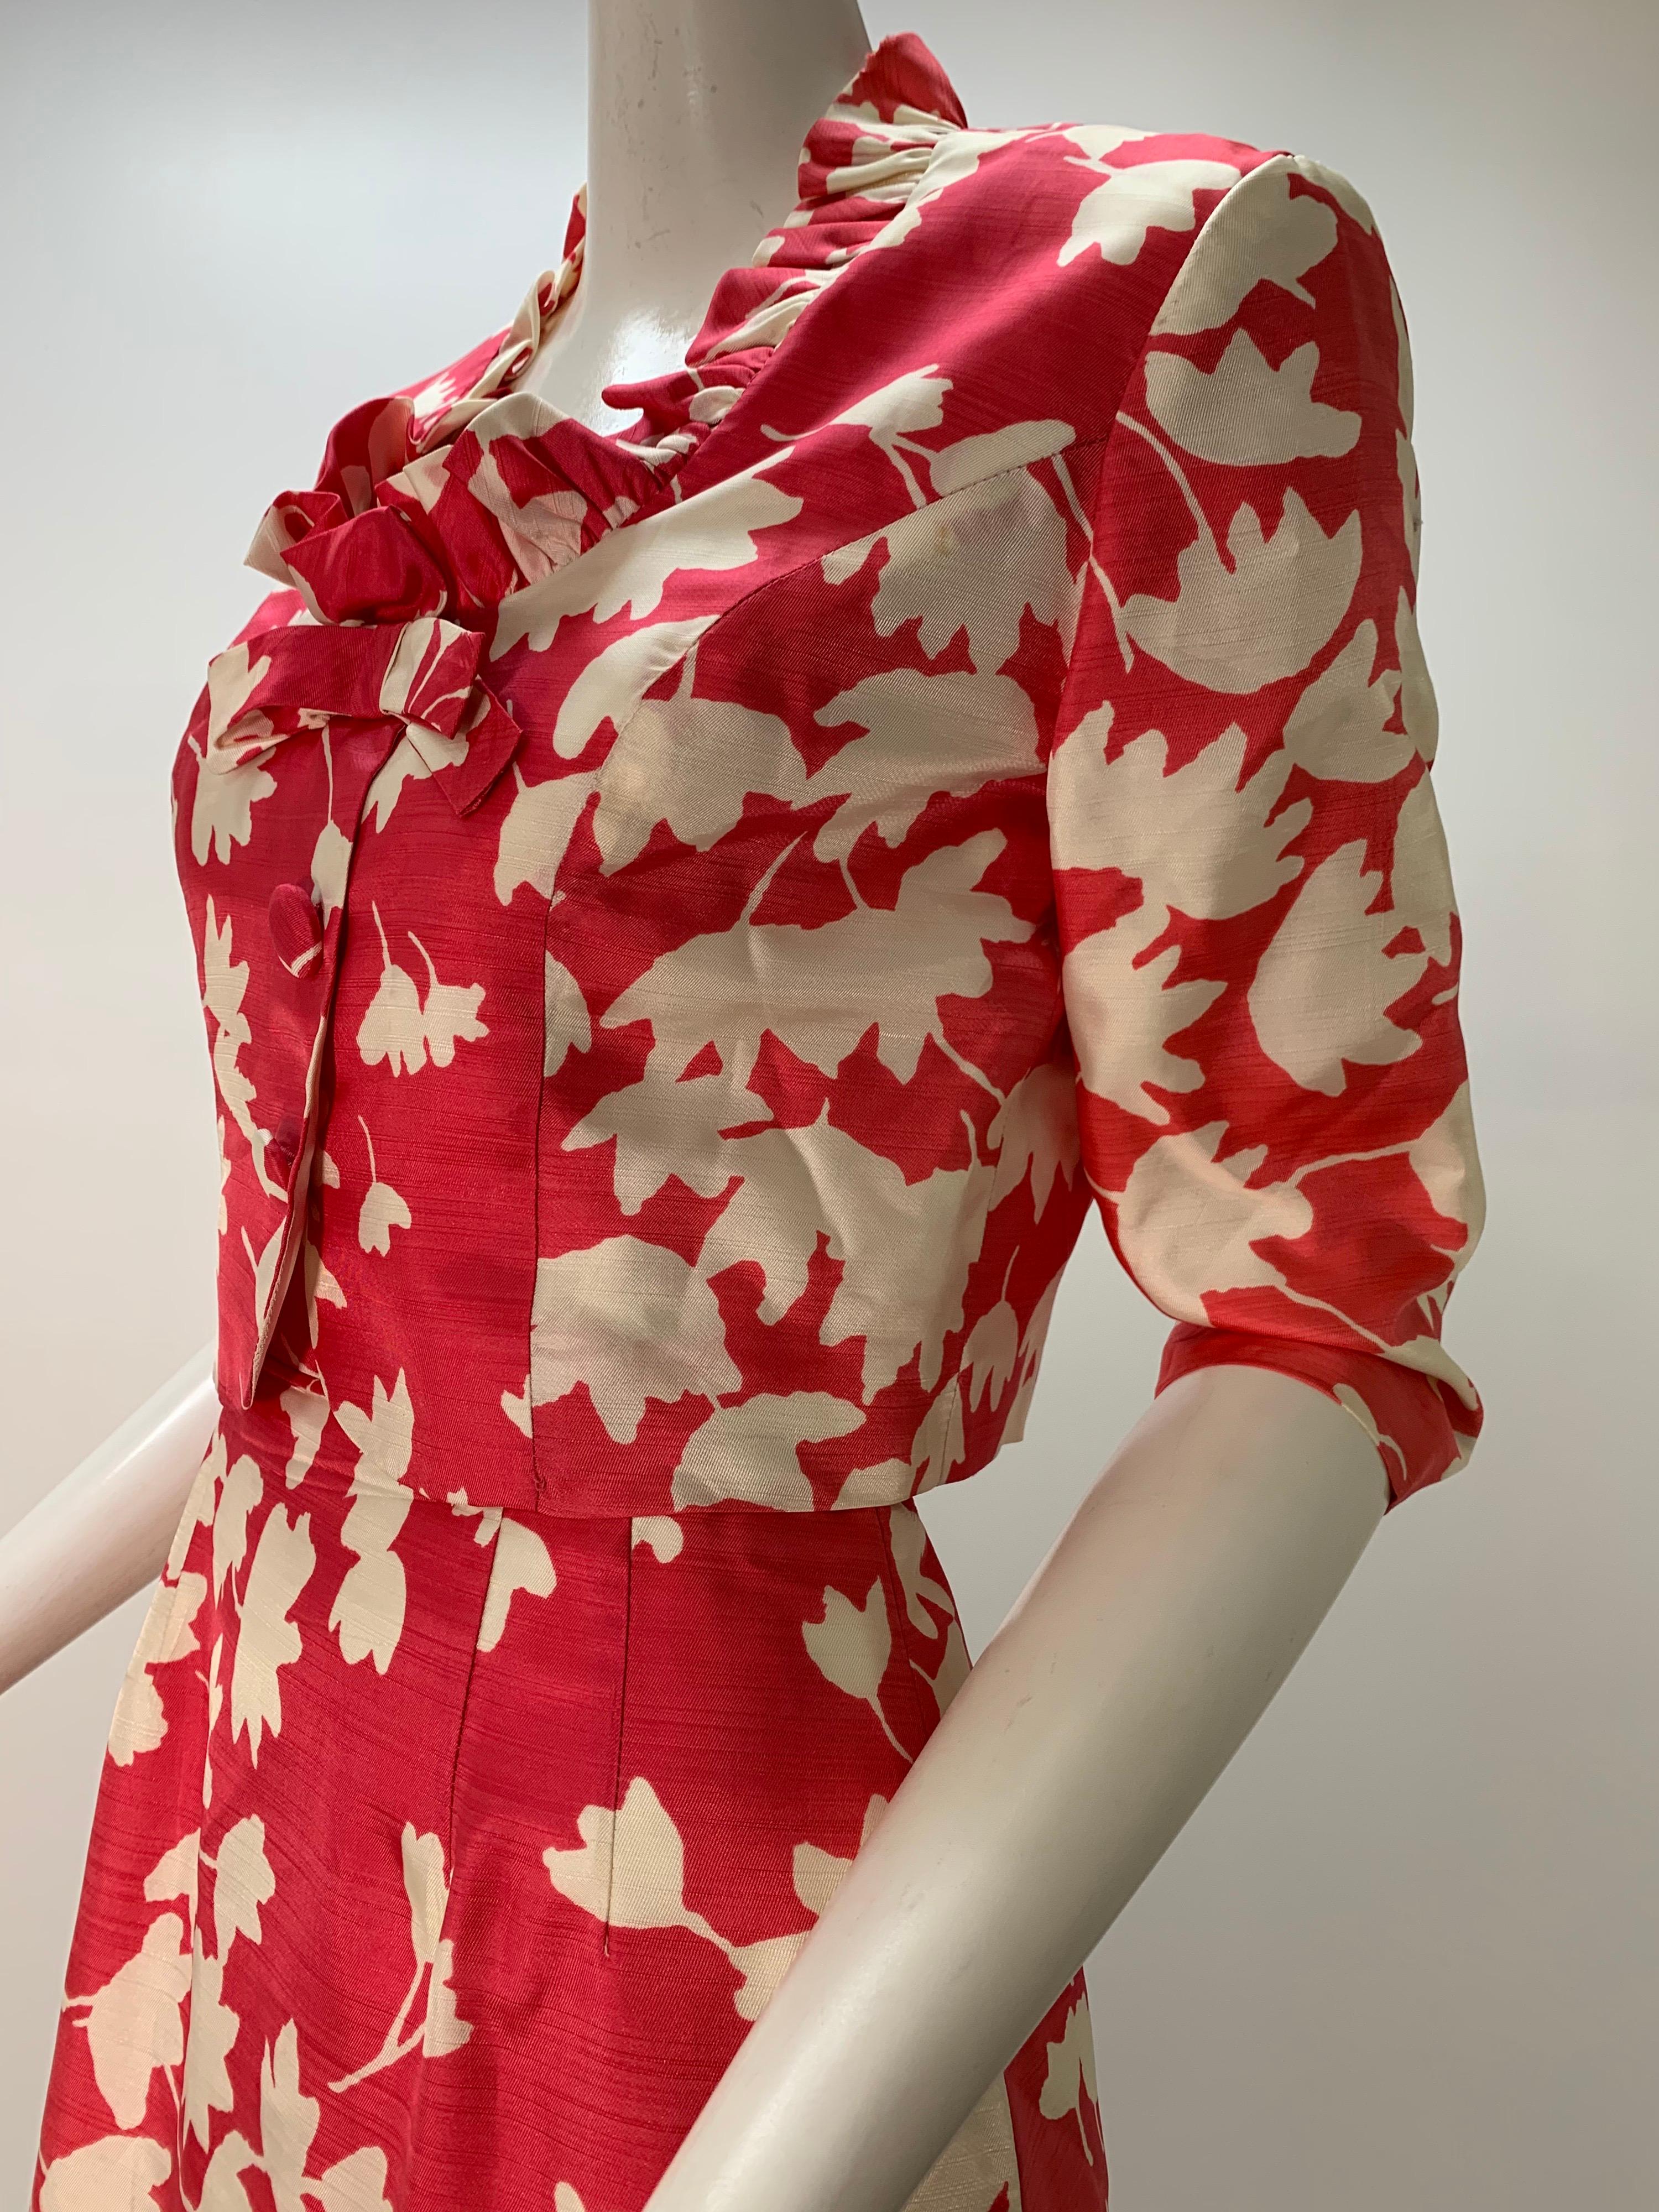 1960s Carol Craig Pink & White Floral Silhouette Print Dress & Jacket Ensemble In Excellent Condition For Sale In Gresham, OR